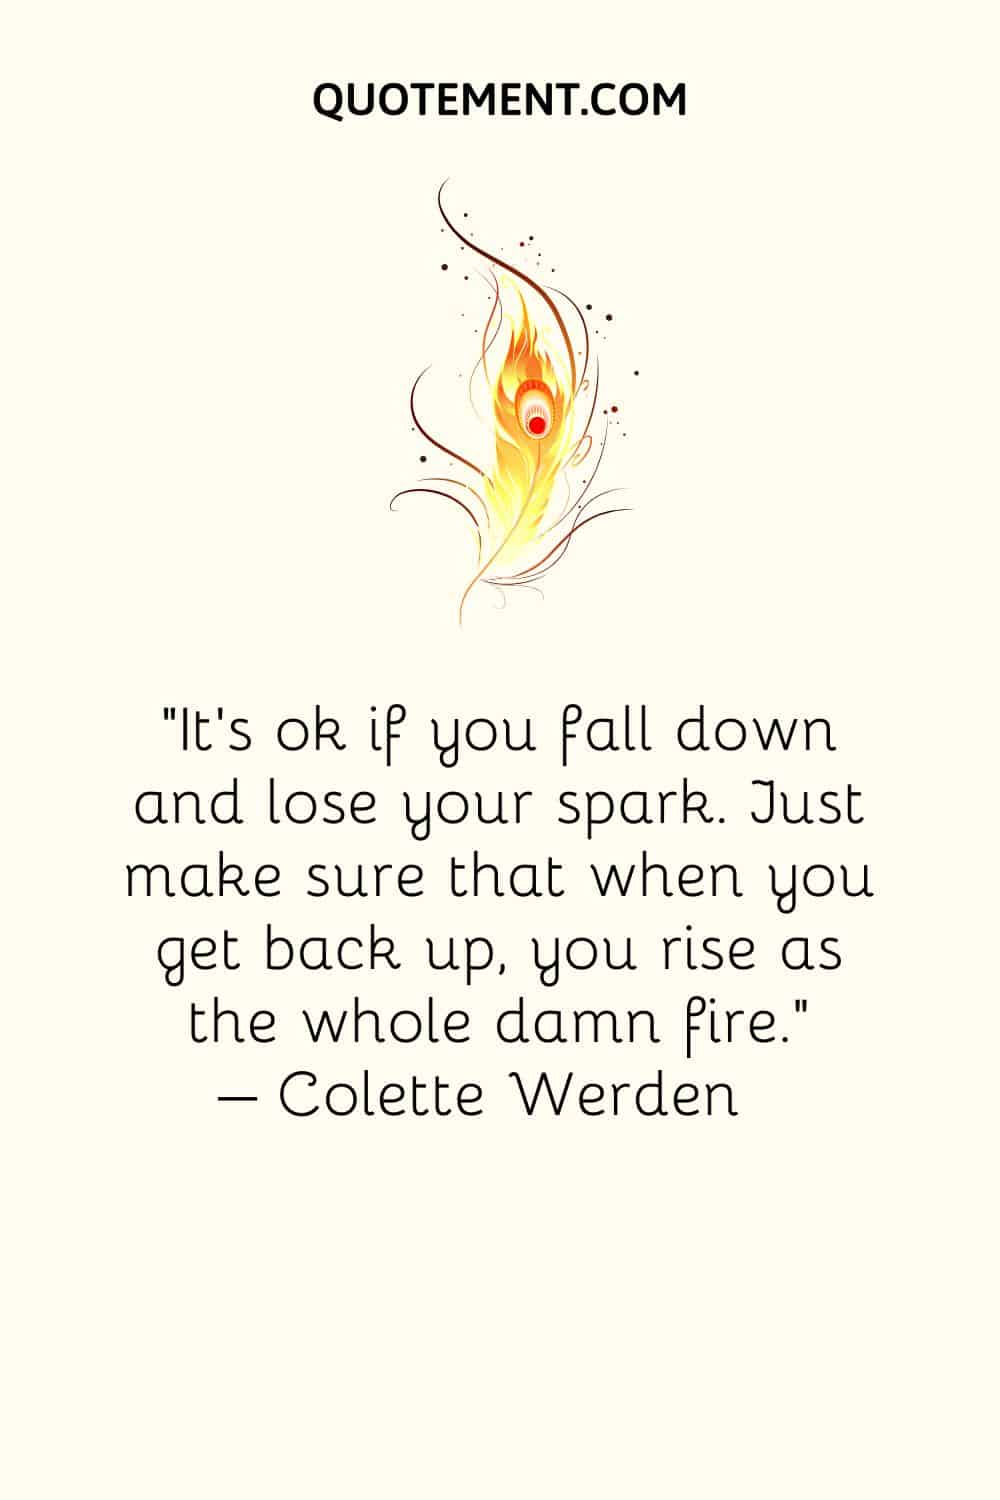 It’s ok if you fall down and lose your spark.